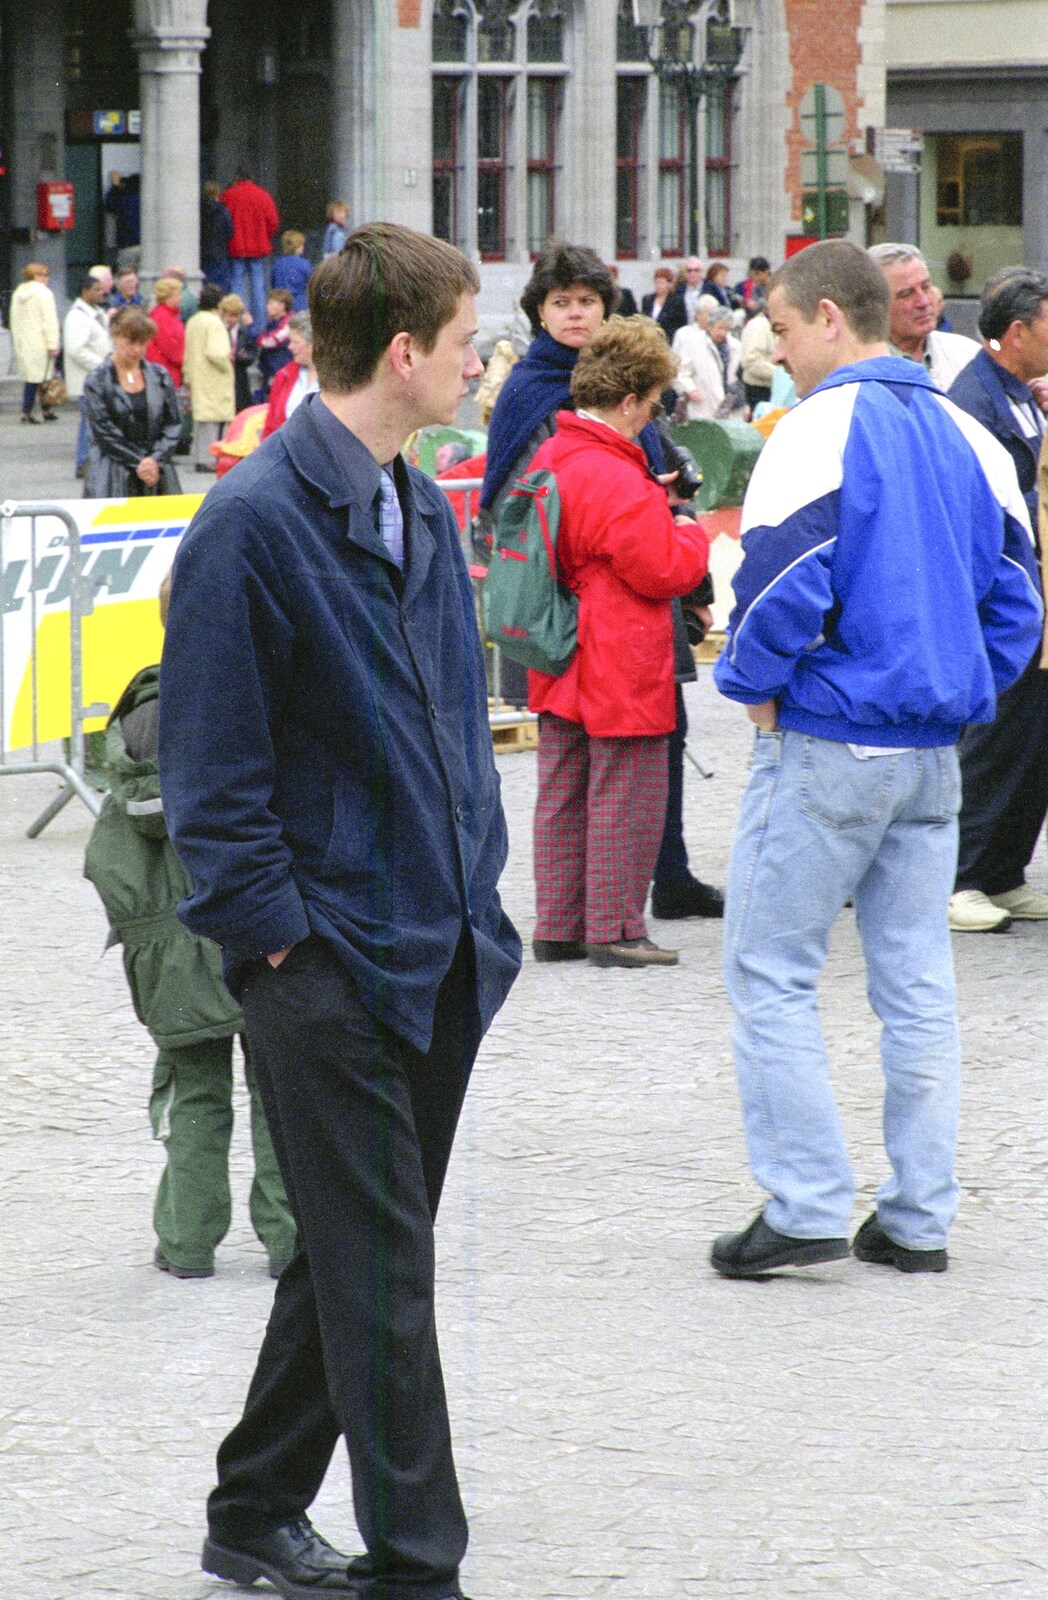 Andrew roams about from CISU: An SCC Day-Trip to Bruges, Belgium - 26th May 2000